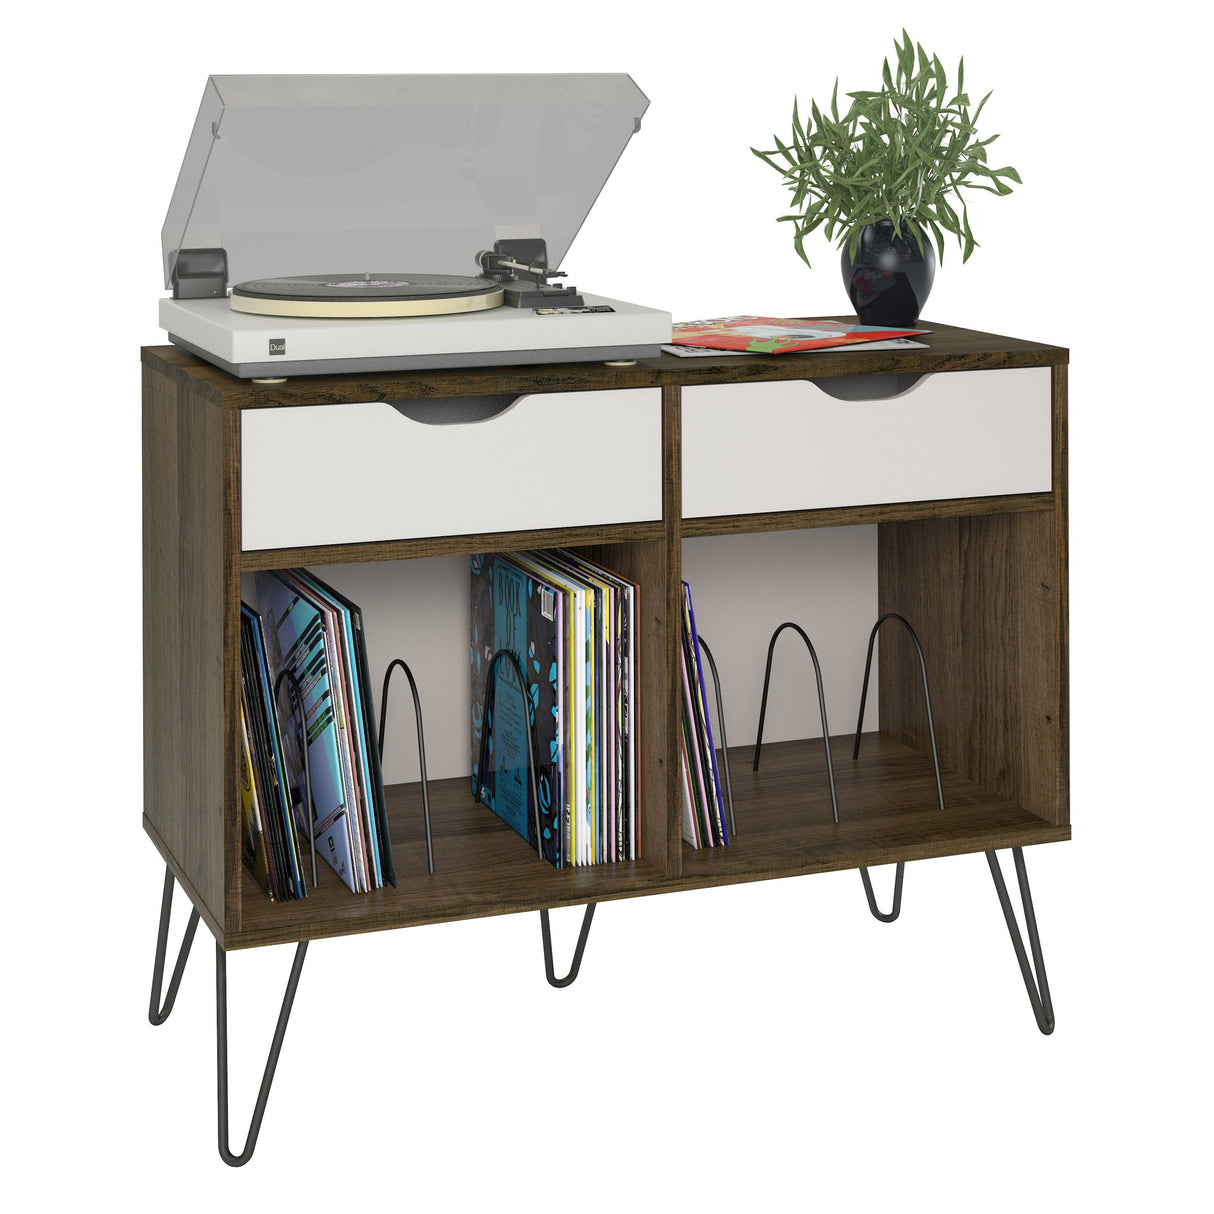 Dorel Home Concord Turntable Stand with Drawers in Brown Oak